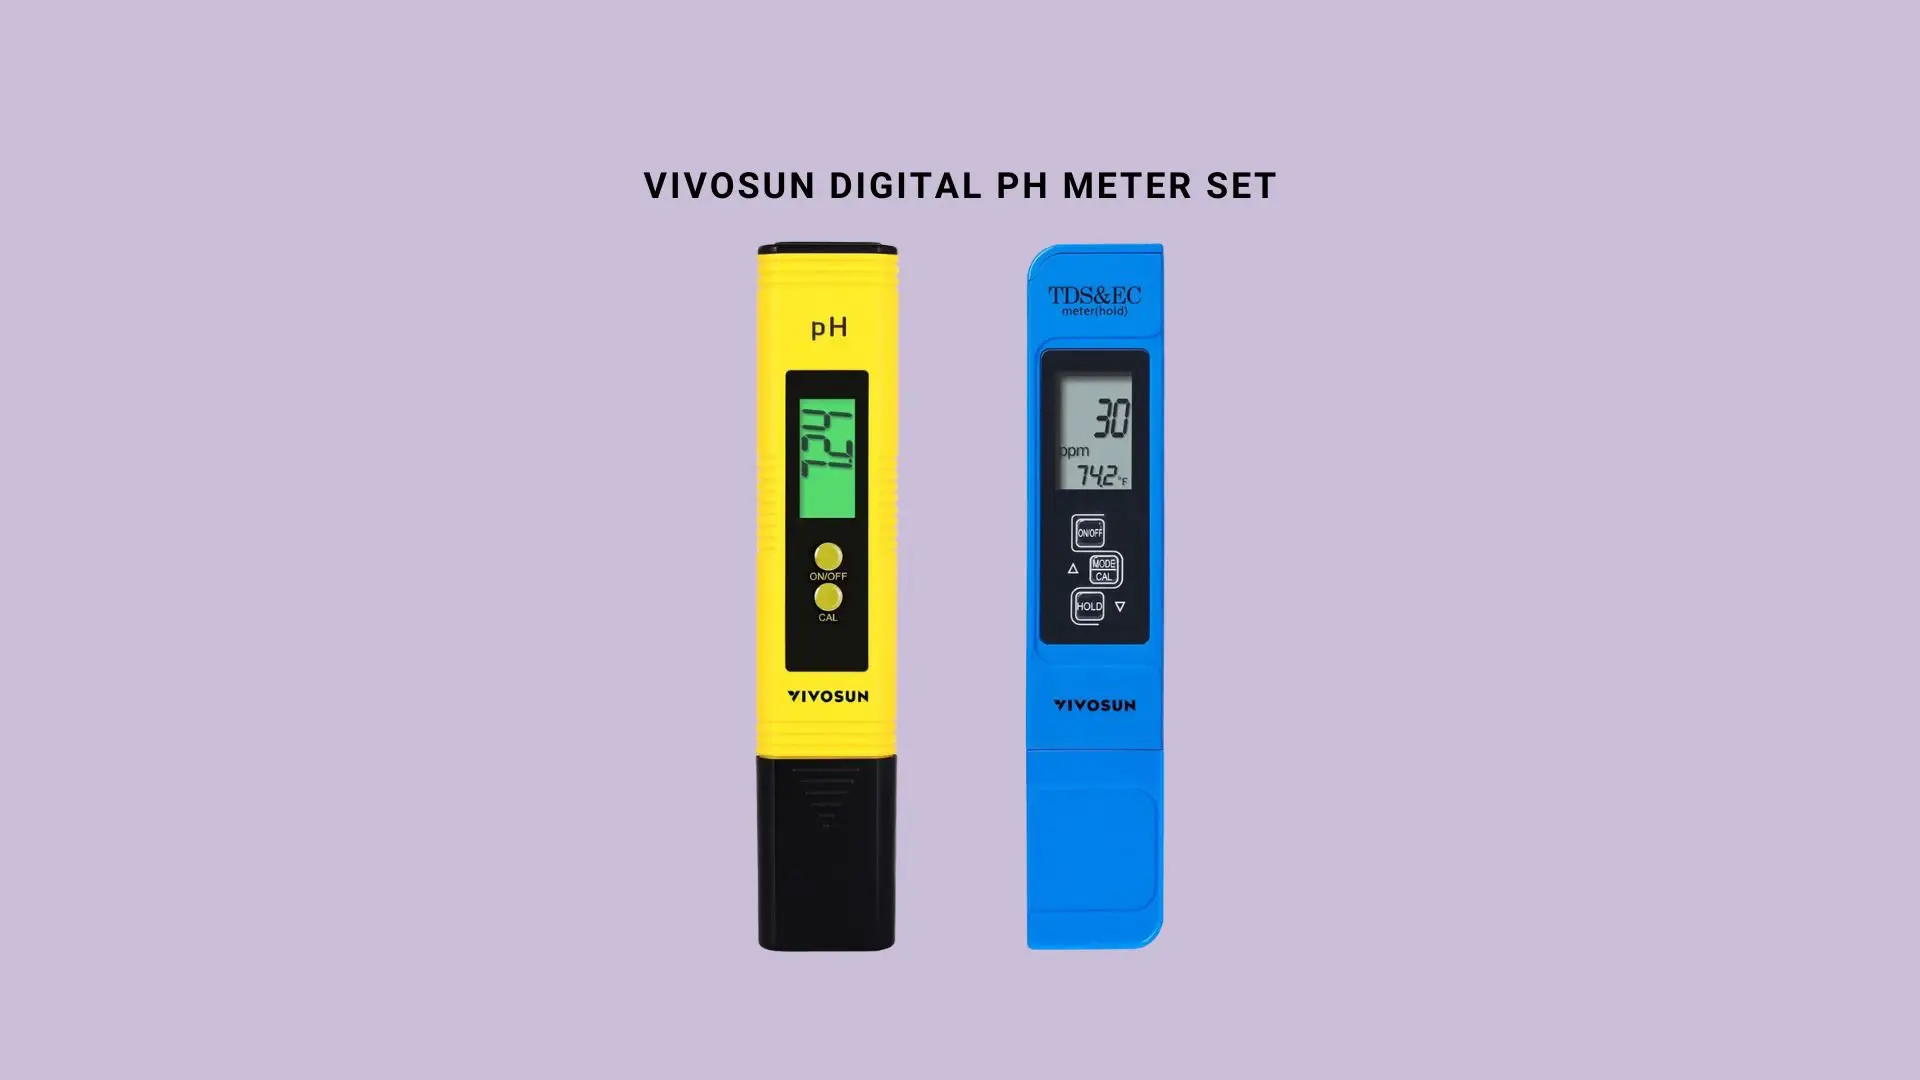 % Get a comprehensive review of the VIVOSUN digital pH meter set, including its features, pros and cons to help you decide if it's worth investing in.